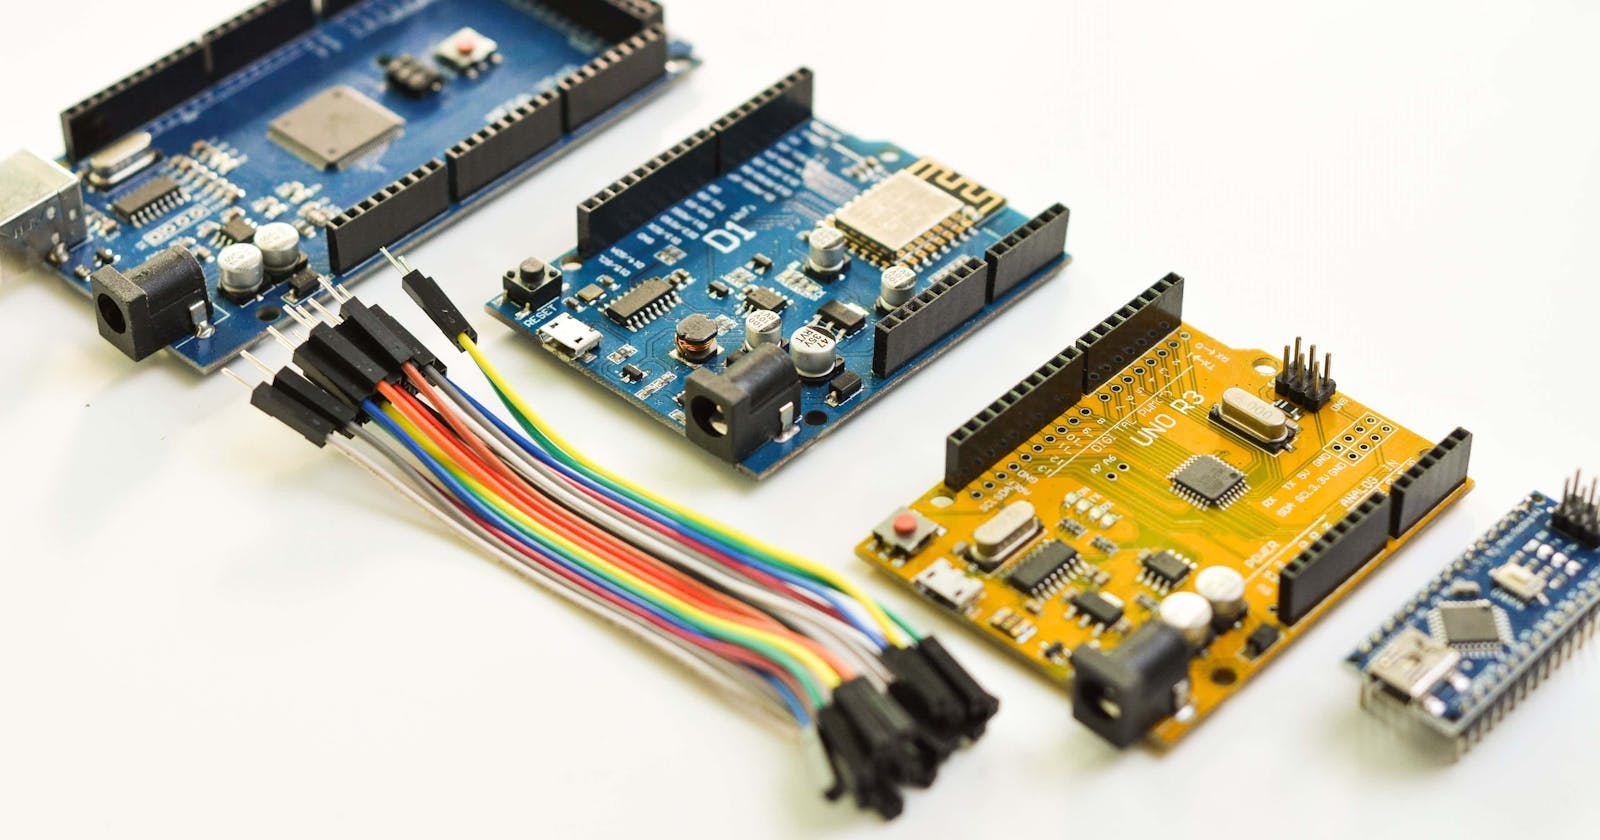 Recommended boards for IoT development and prototyping